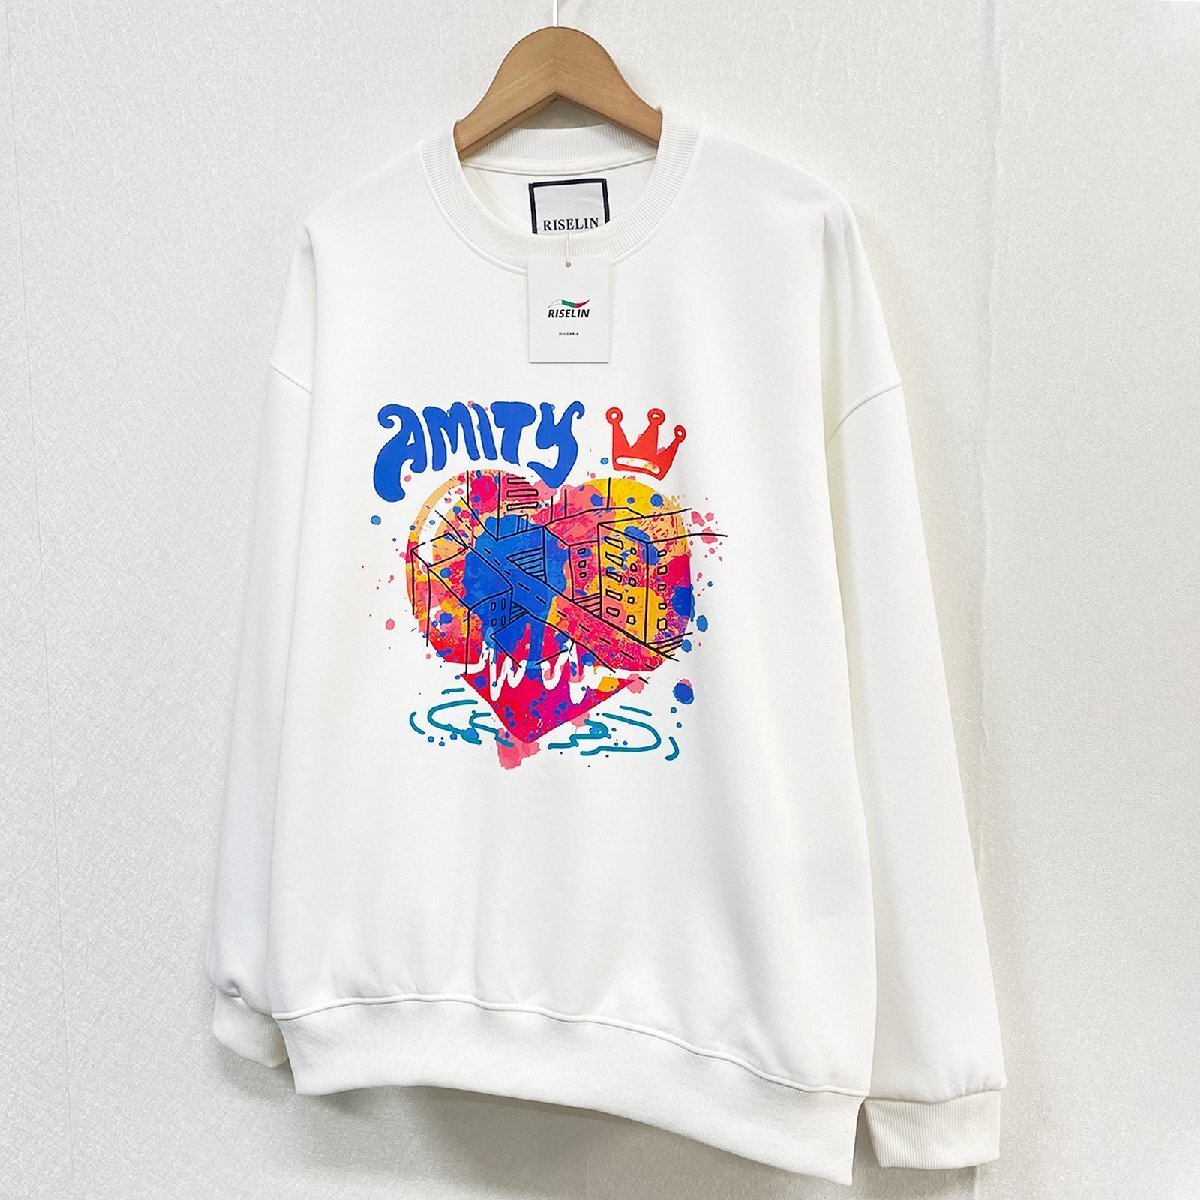  high grade Europe made * regular price 4 ten thousand * BVLGARY a departure *RISELIN sweatshirt cotton 100% comfortable ventilation elasticity Heart pull over colorful everyday man and woman use M